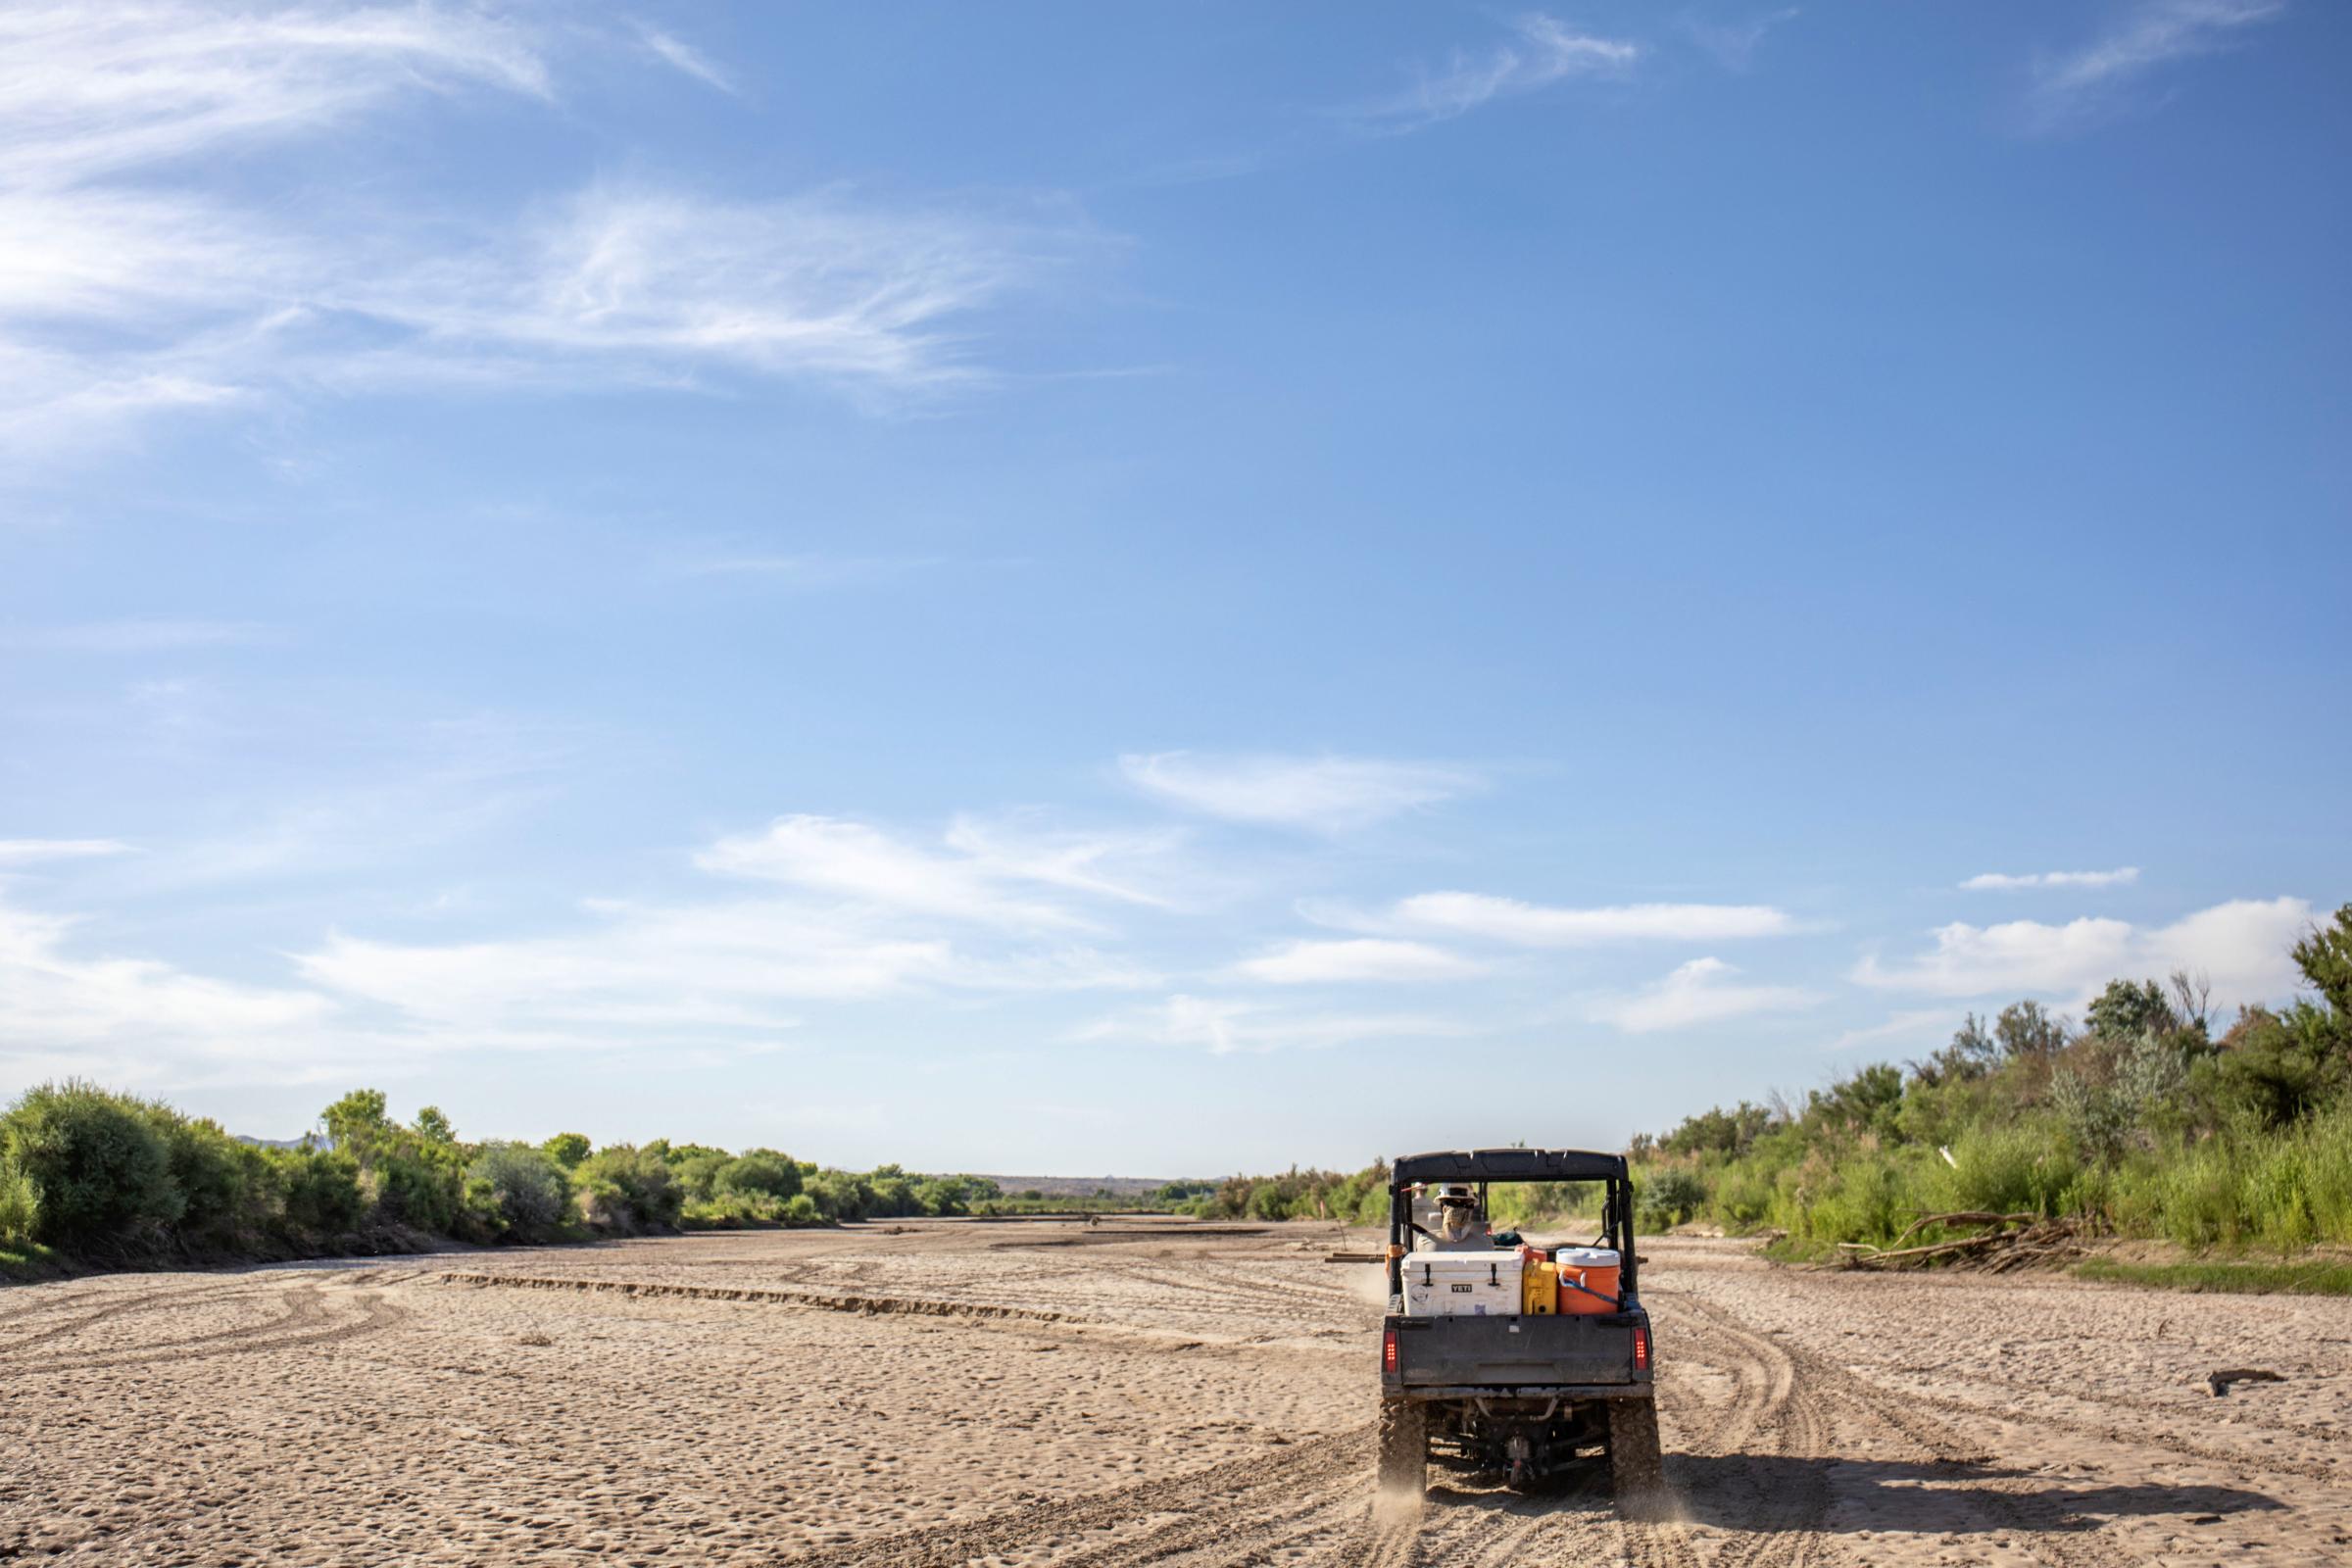 Crisis on the Rio Grande - A vehicle in the dry riverbed of the Rio Grande. The San Acacia Reach is a stretch of the Rio...